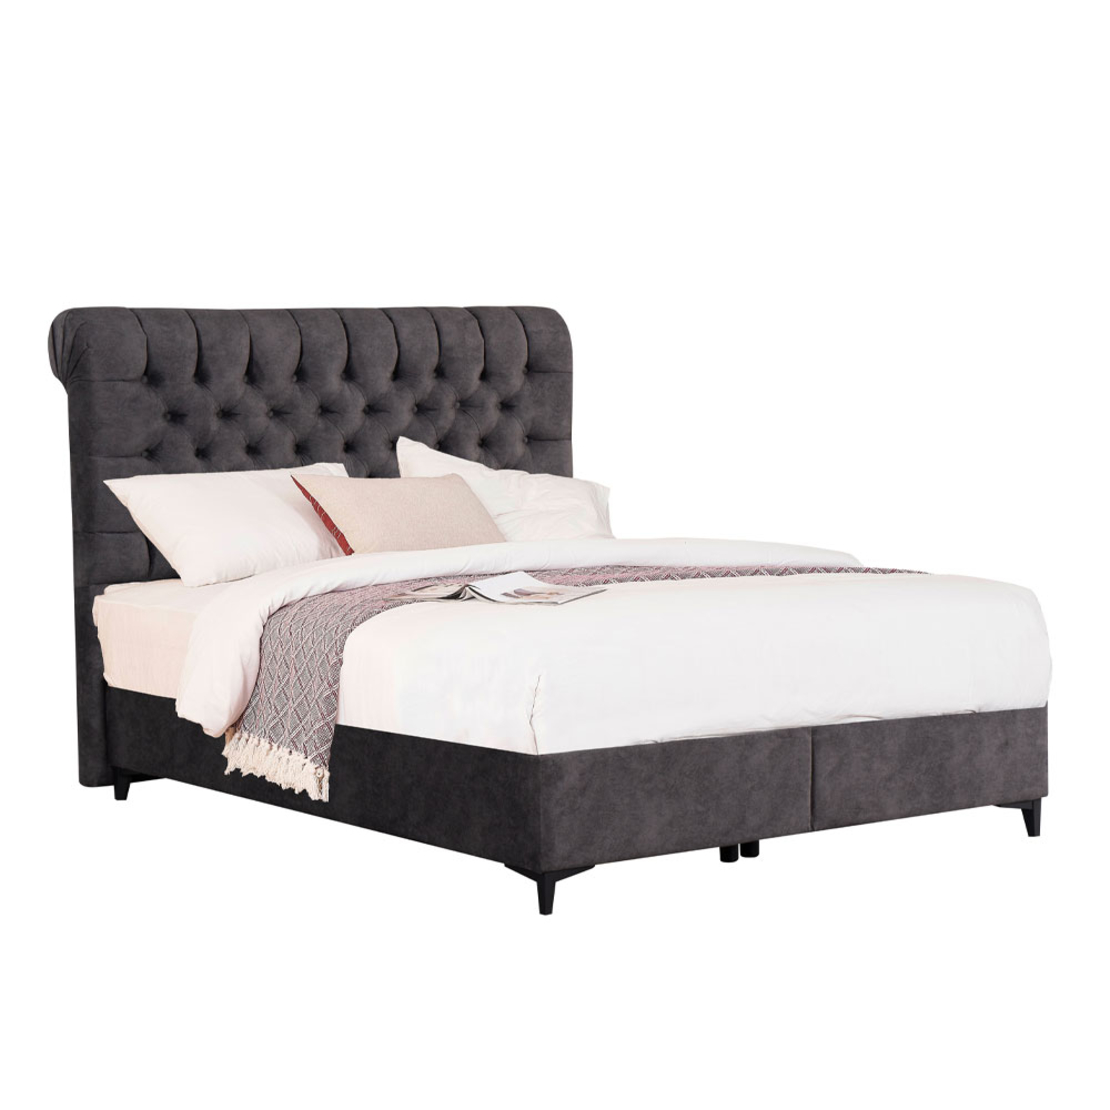 CHESTER BED WITH STORAGE (FOR MATTRESS 160x200cm)